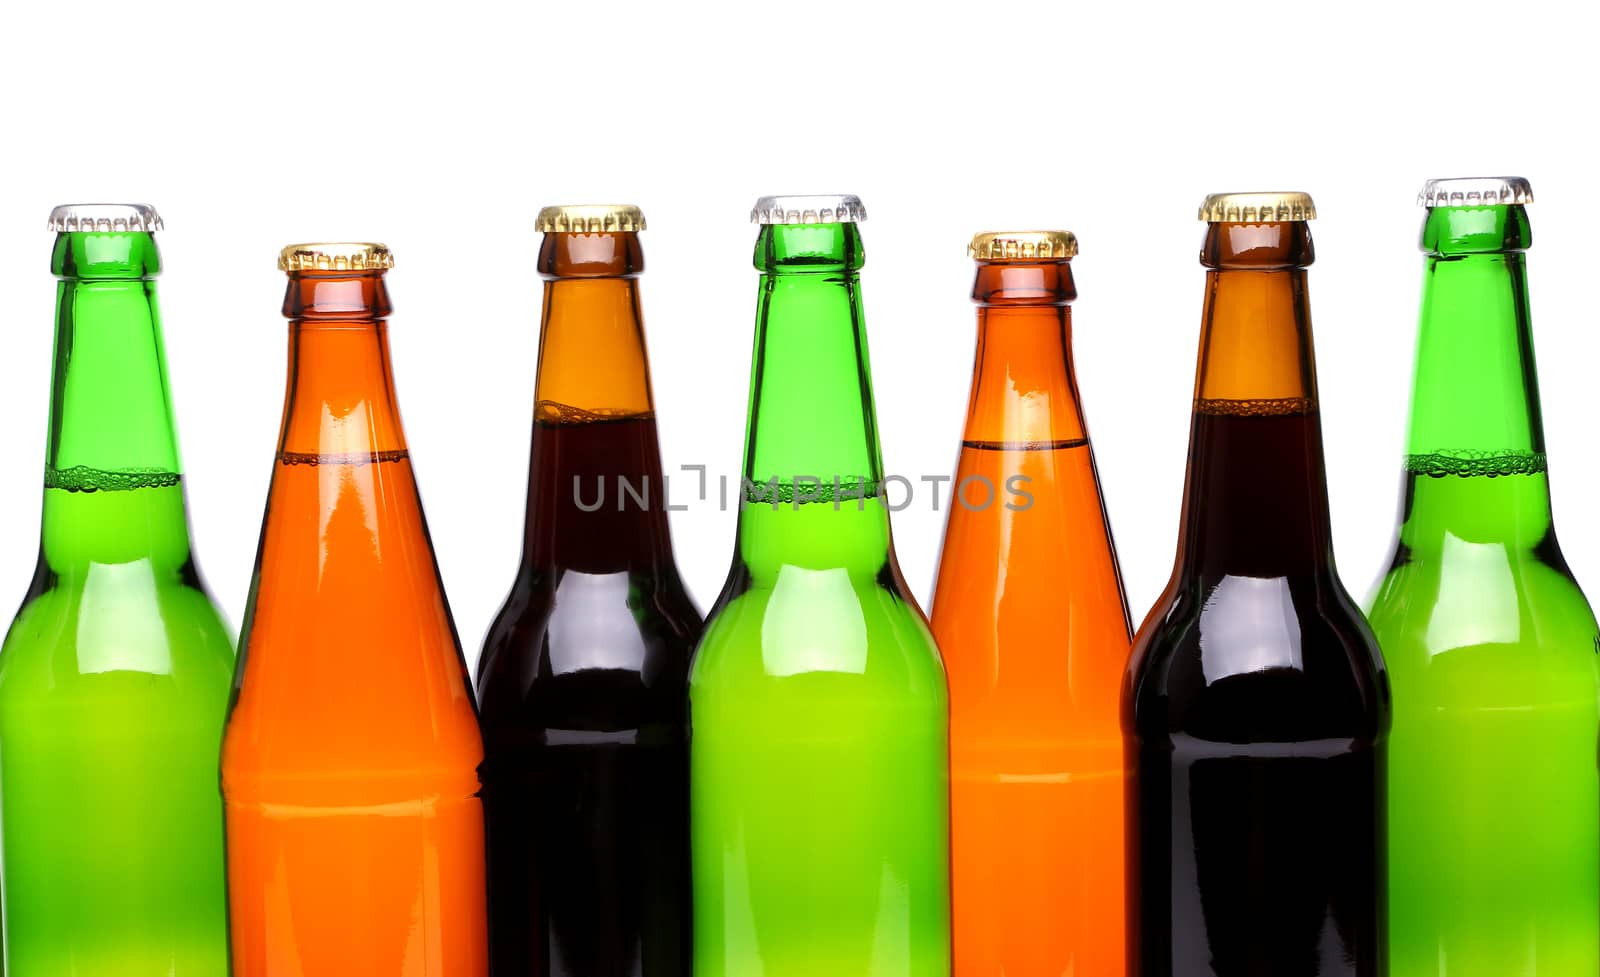 A row of top beer bottles by indigolotos